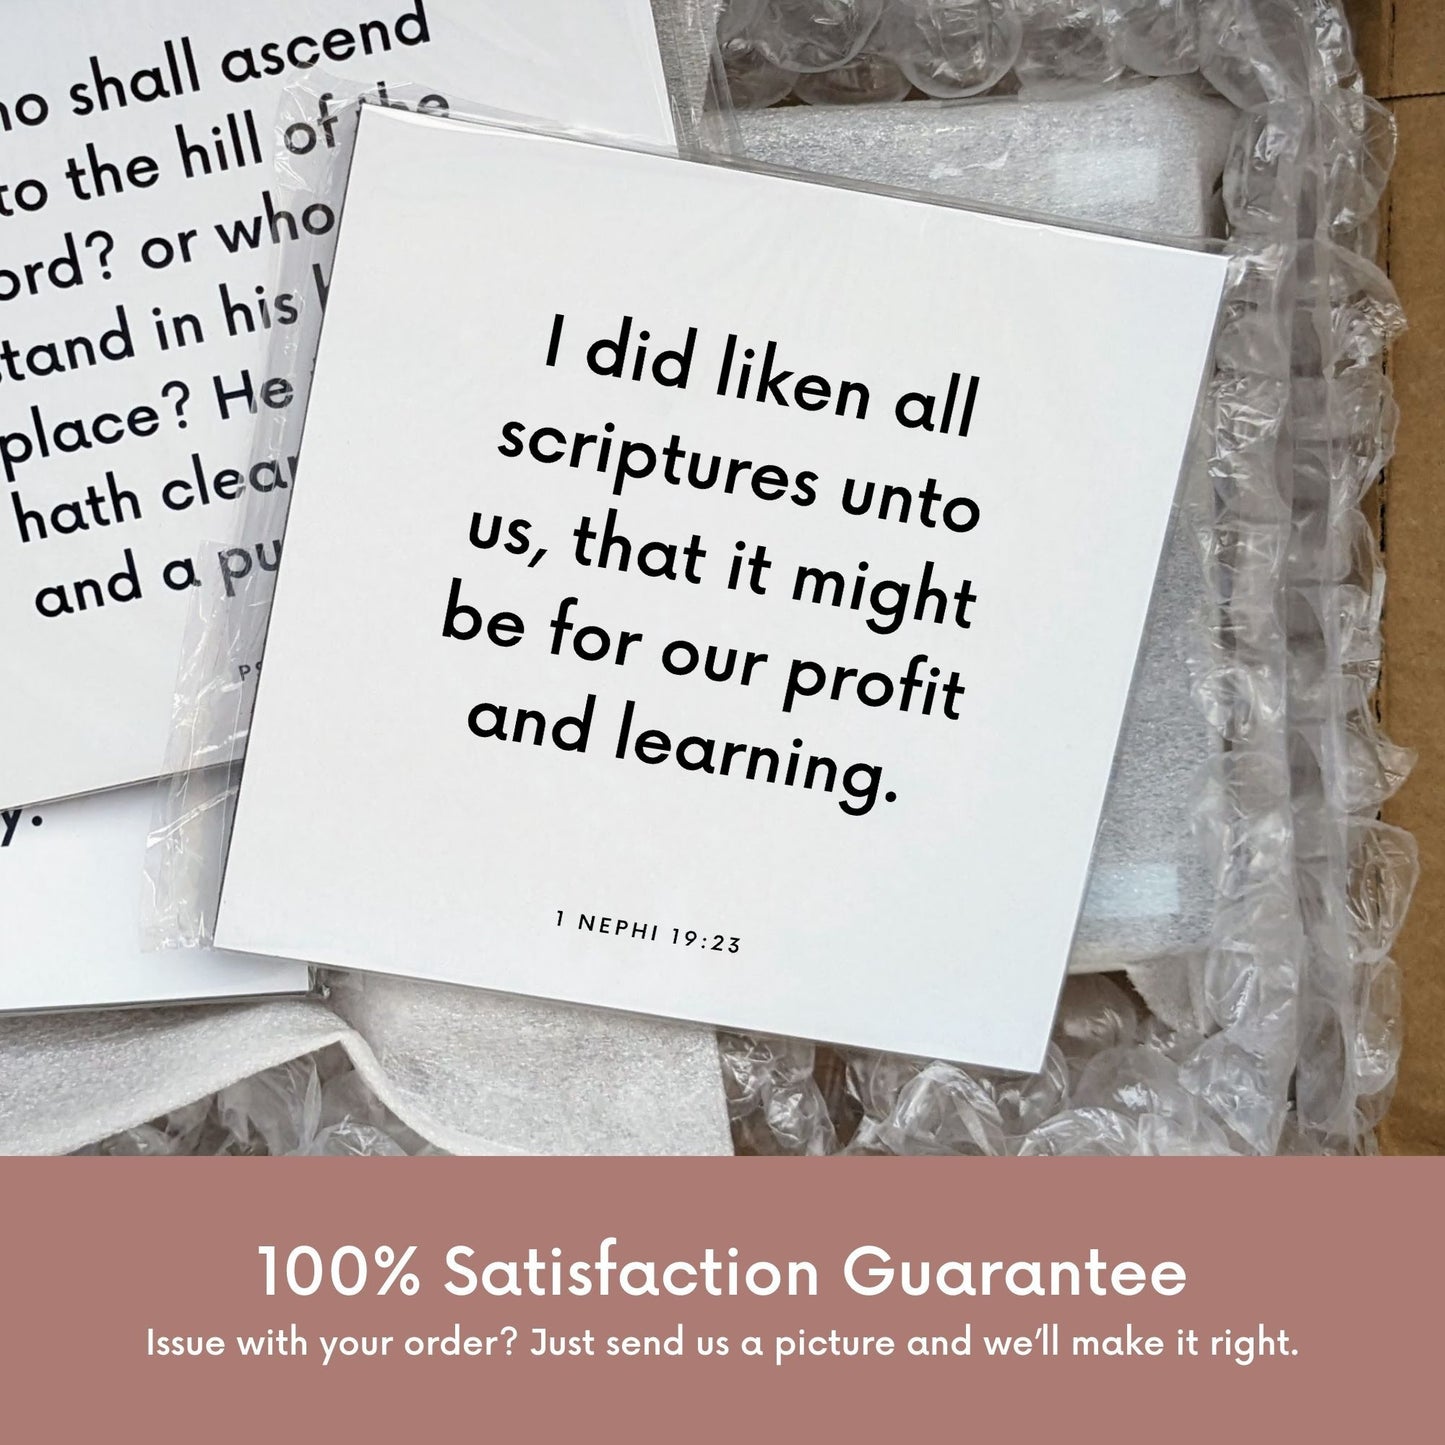 Shipping materials for scripture tile of 1 Nephi 19:23 - "I did liken all scriptures unto us"